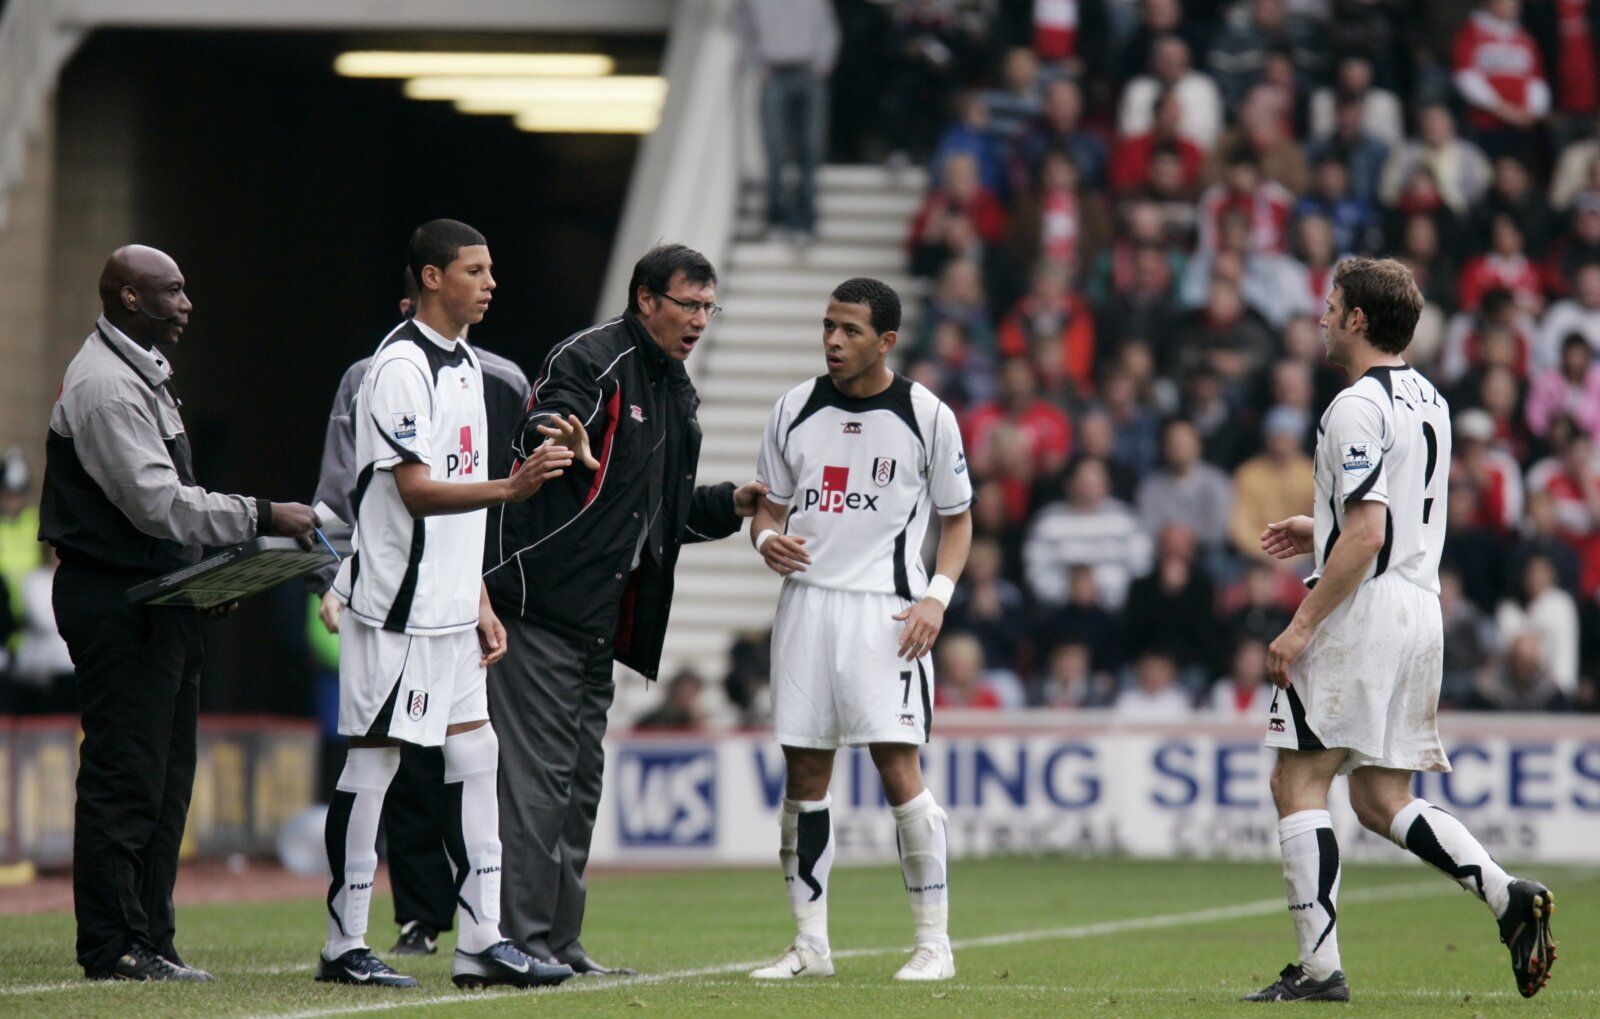 Football - Middlesbrough v Fulham - FA Barclays Premiership - The Riverside Stadium - 06/07 , 13/5/07 
Matthew Briggs - Fulham comes on for debut / Lawrie Sanchez - Fulham Manager and Liam Rosenior  
Mandatory Credit: Action Images / Lee Smith 
NO ONLINE/INTERNET USE WITHOUT A LICENCE FROM THE FOOTBALL DATA CO LTD. FOR LICENCE ENQUIRIES PLEASE TELEPHONE +44 (0) 207 864 9000.